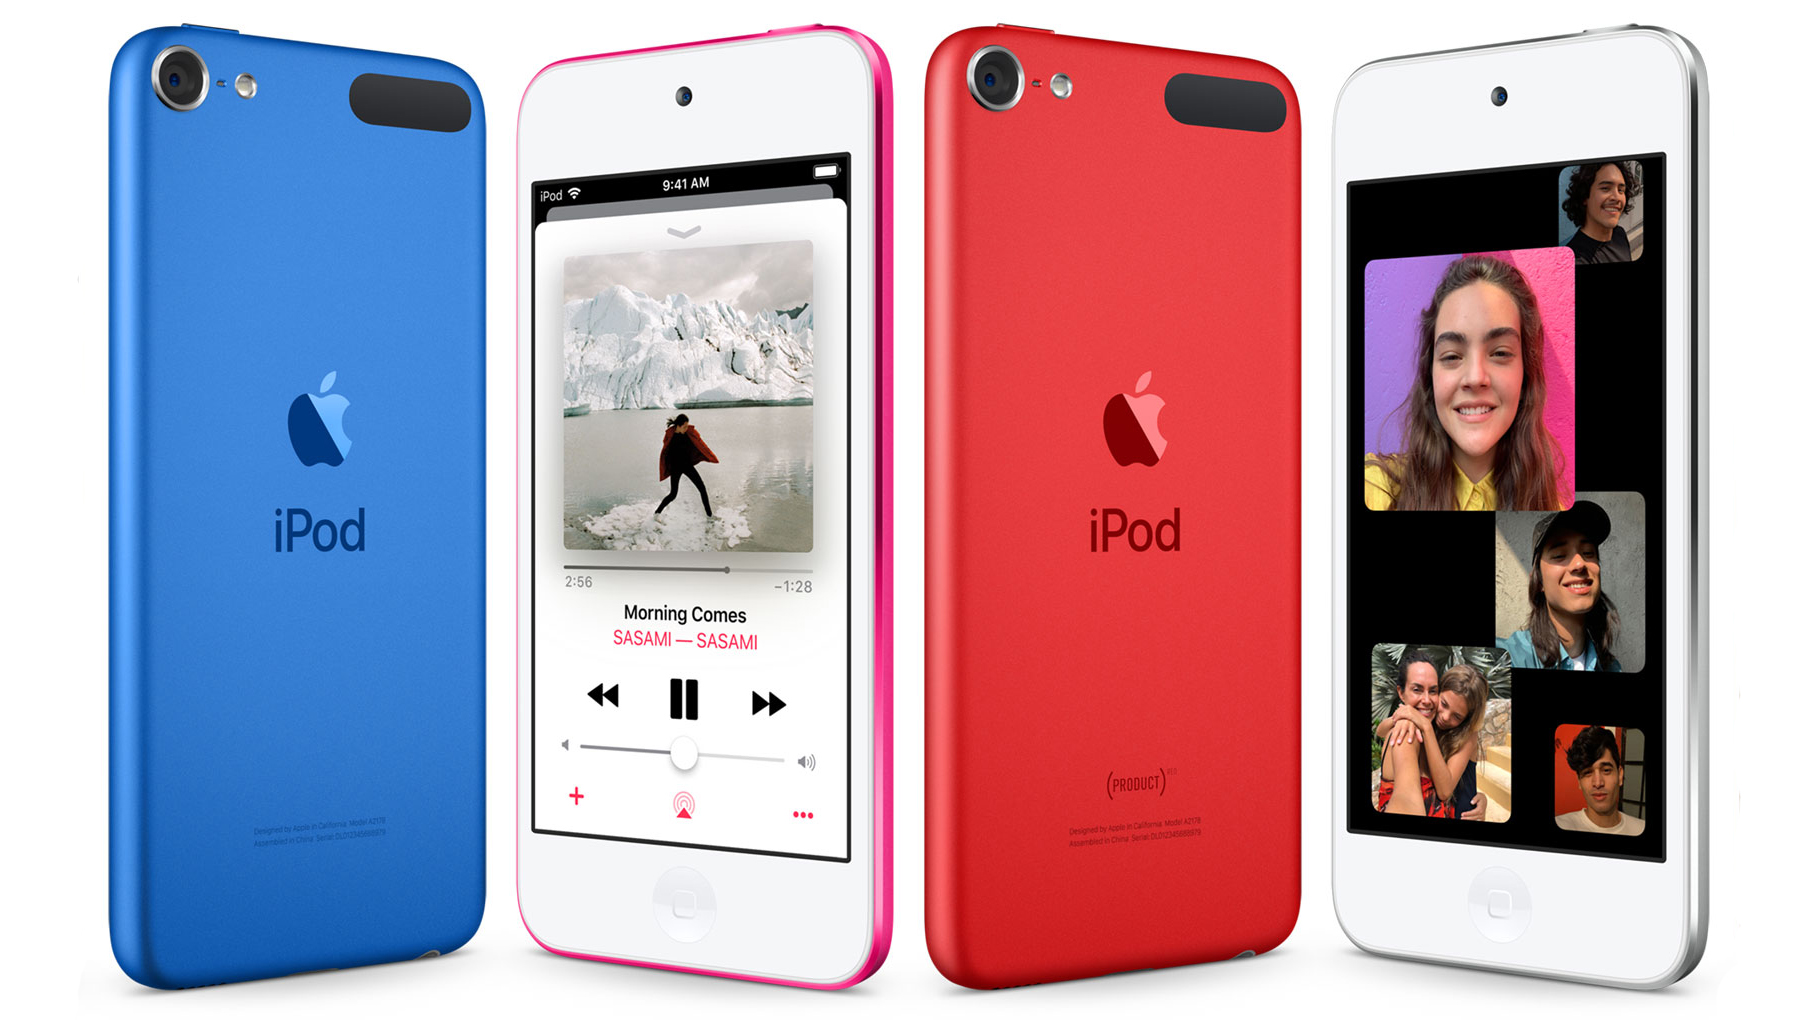 download the new version for ipod Pixia 6.61ke / 6.61je